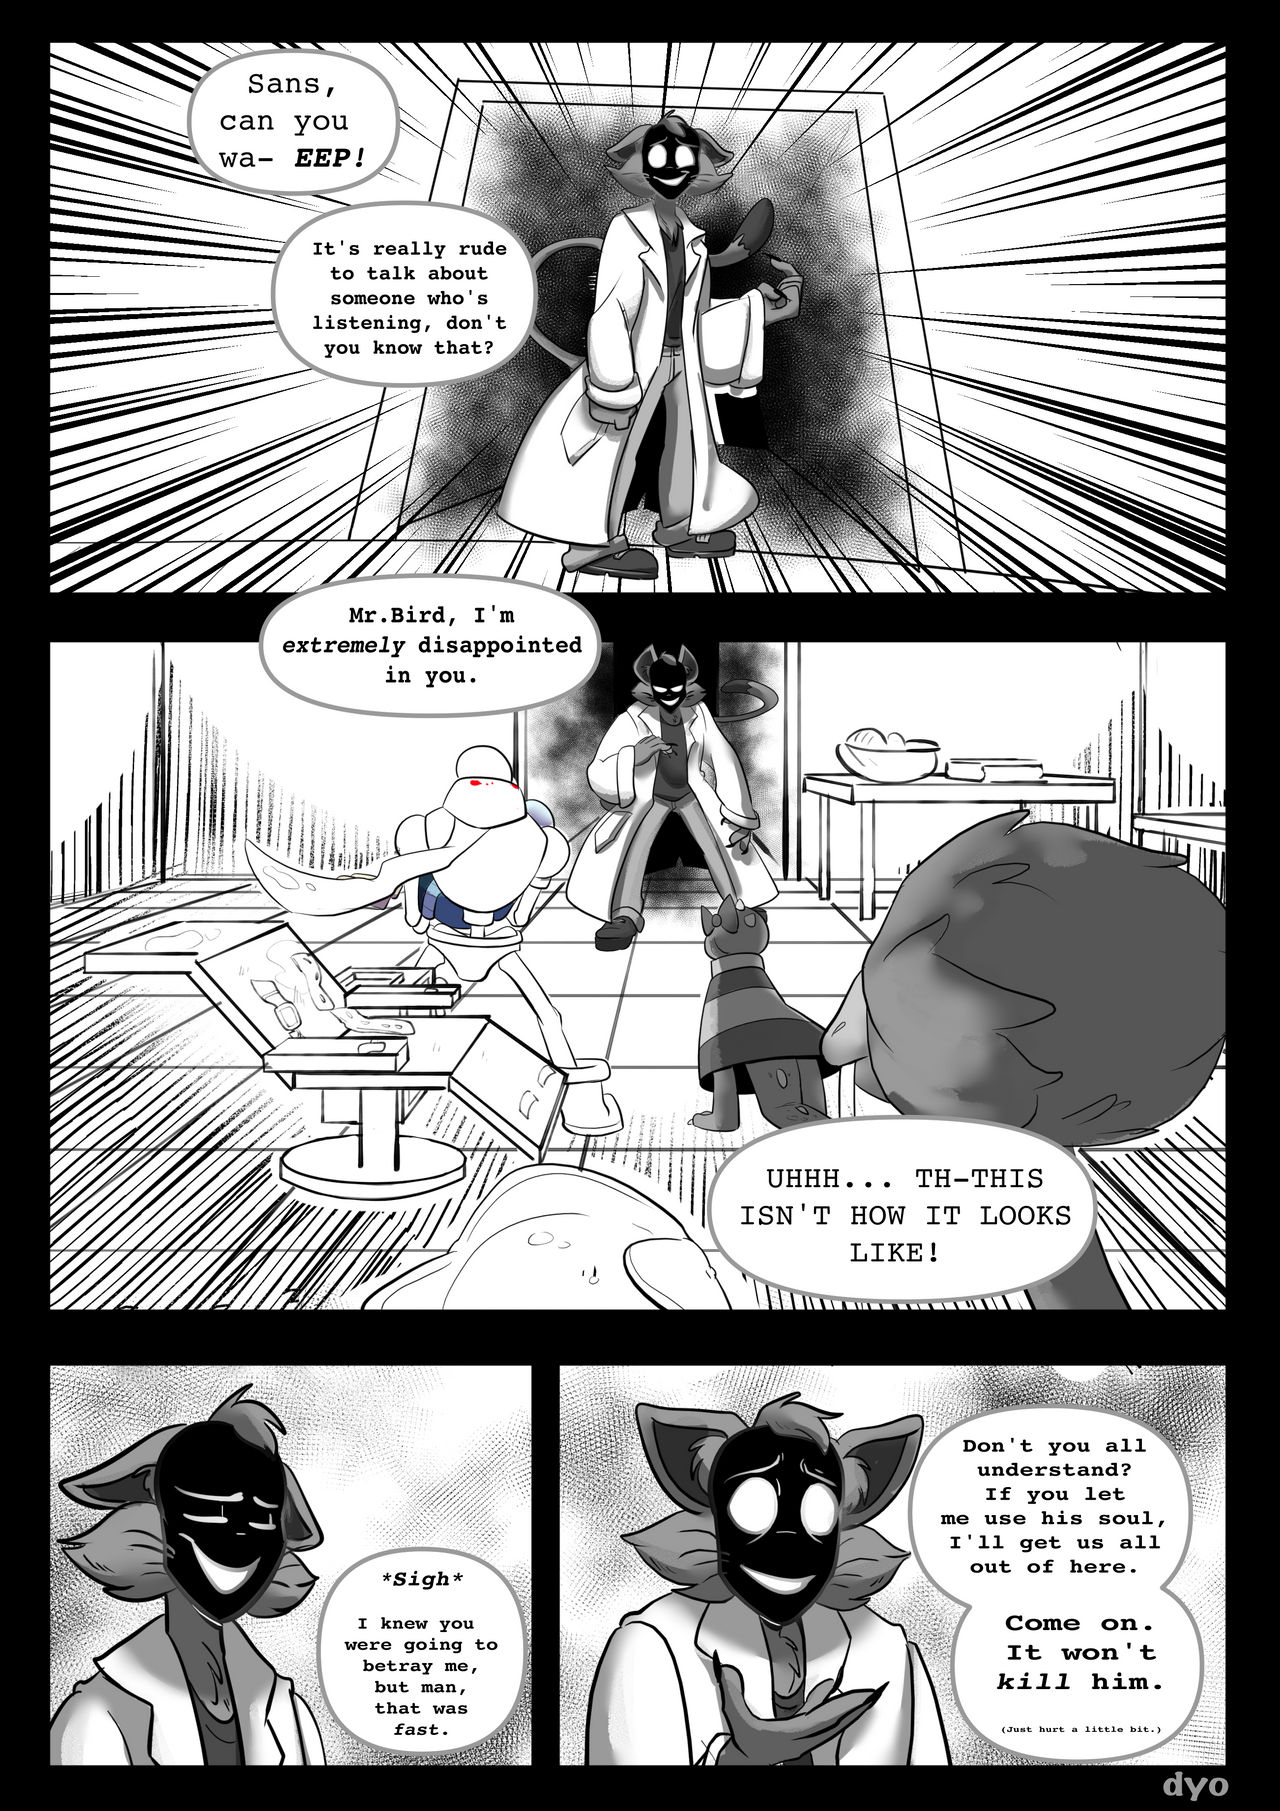 Page 88 - Man, that was fast by dyonisia96 on DeviantArt